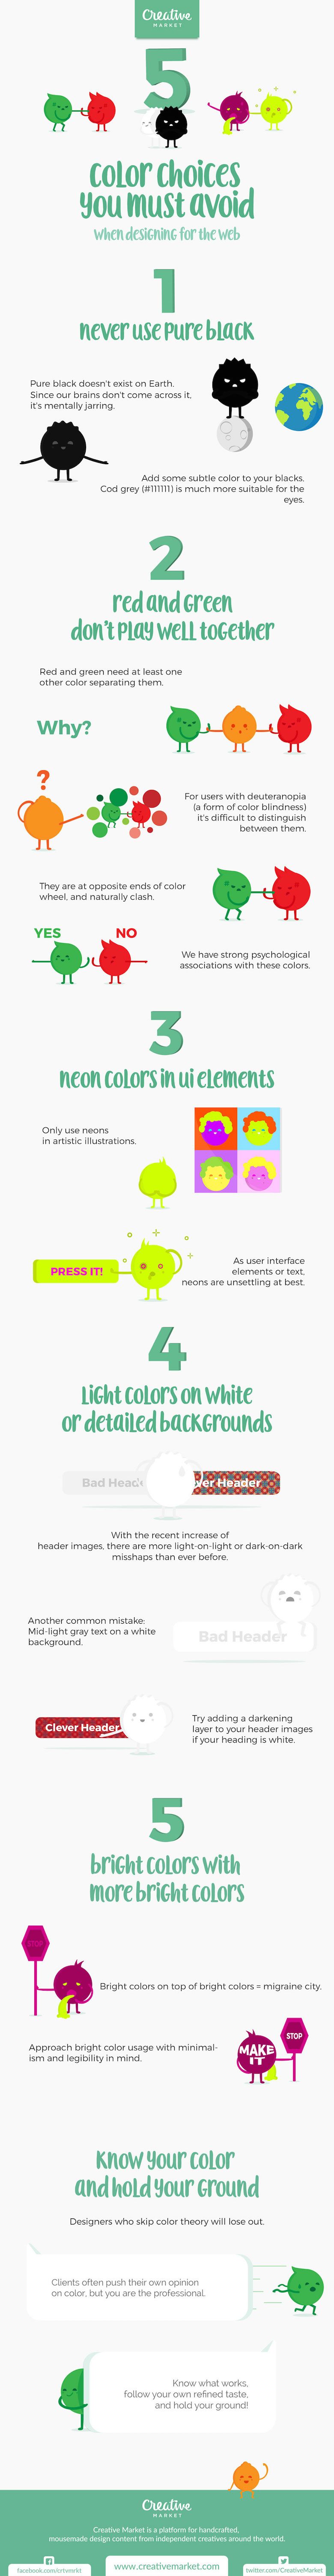 5 Color Choices You Must Avoid When Designing For The Web